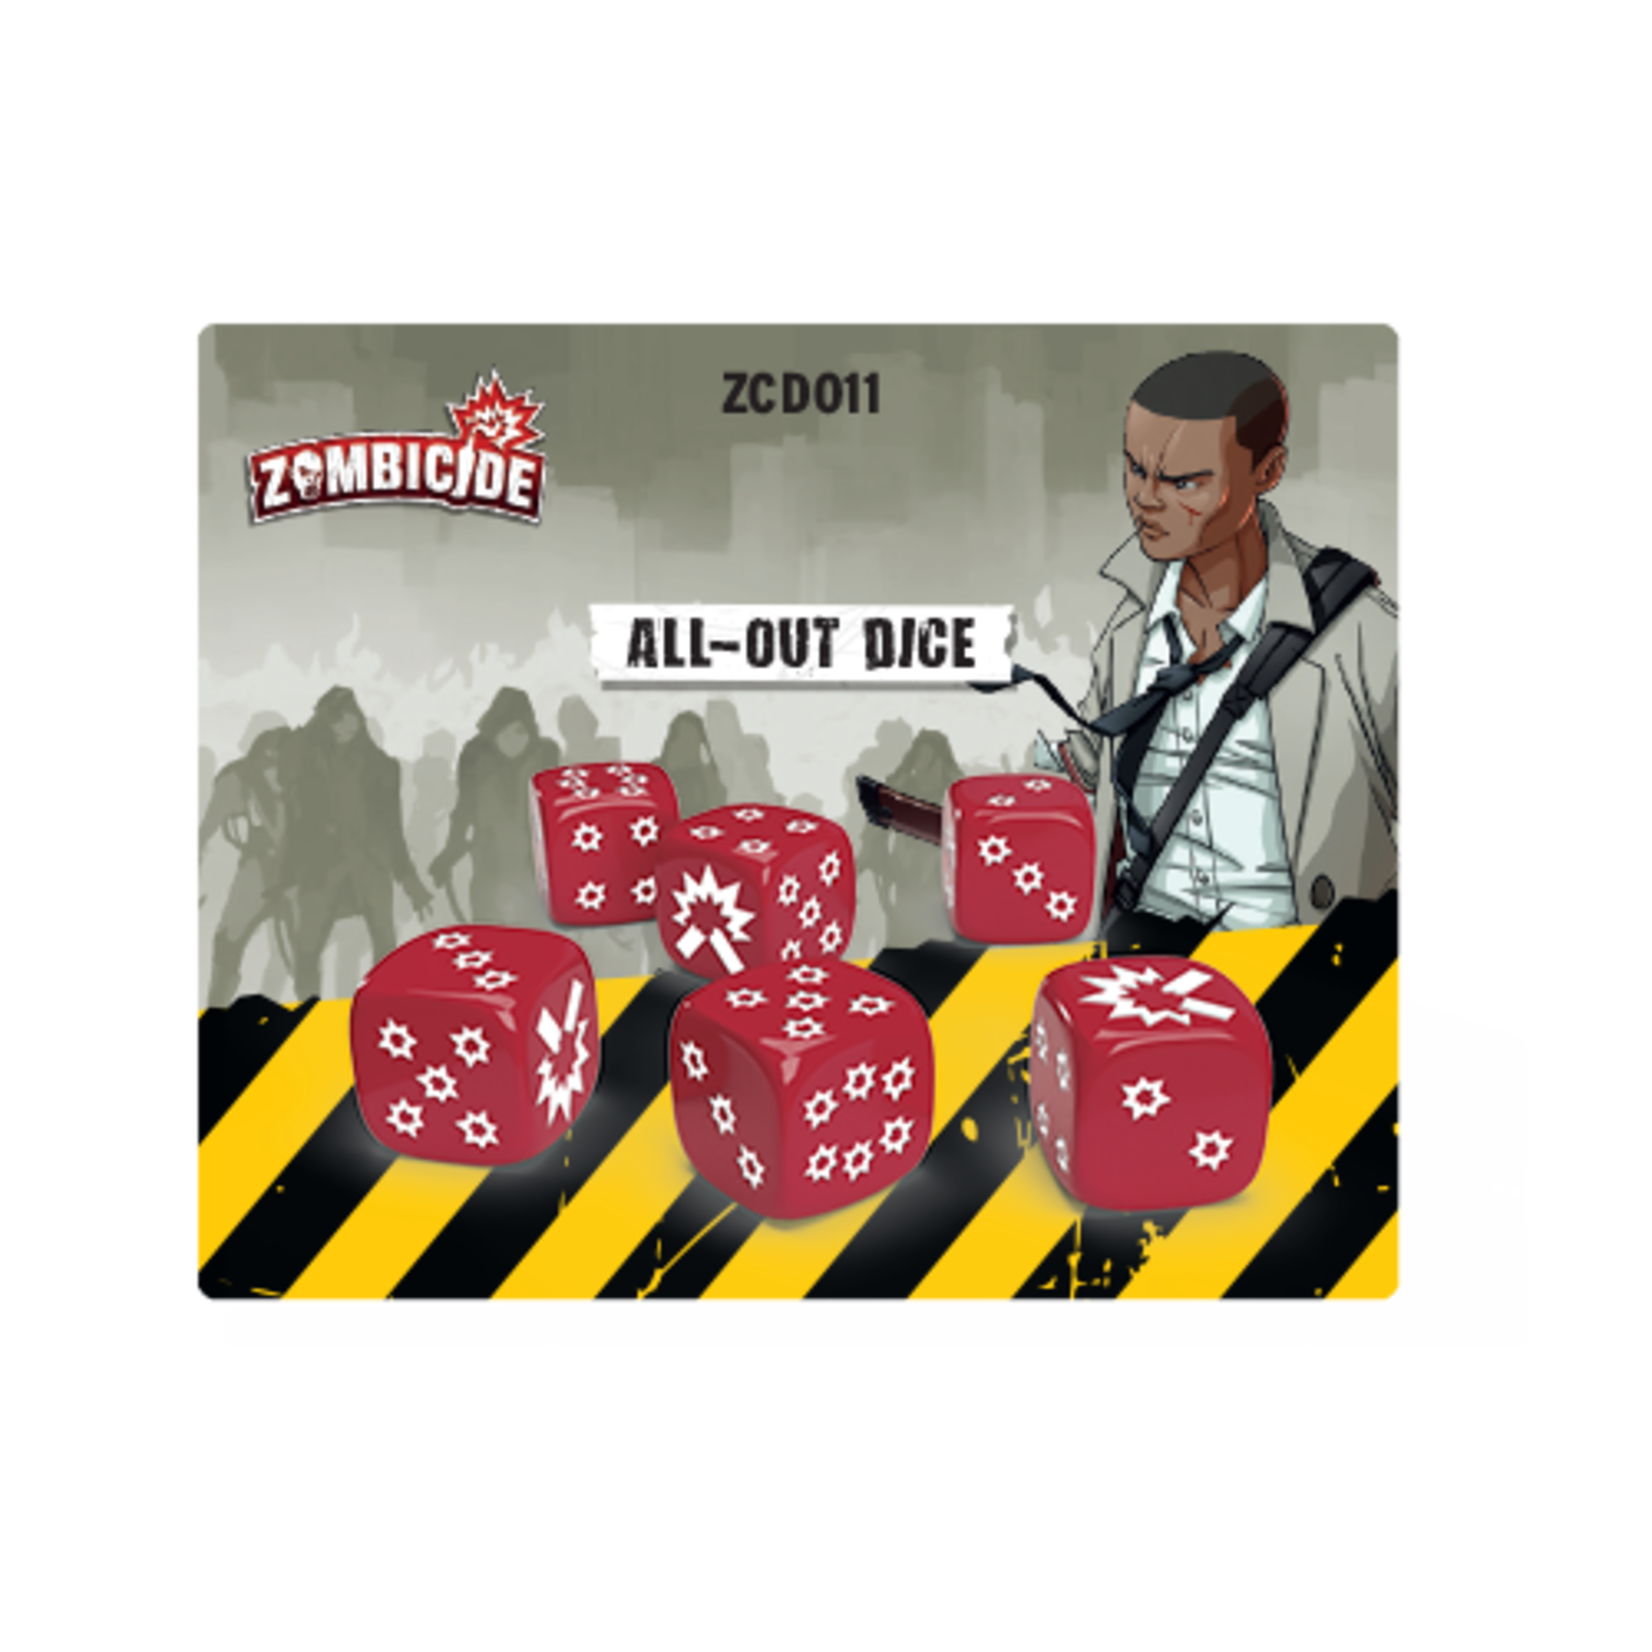 Cool Mini or Not Zombicide 2nd Edition - All-Out Dice